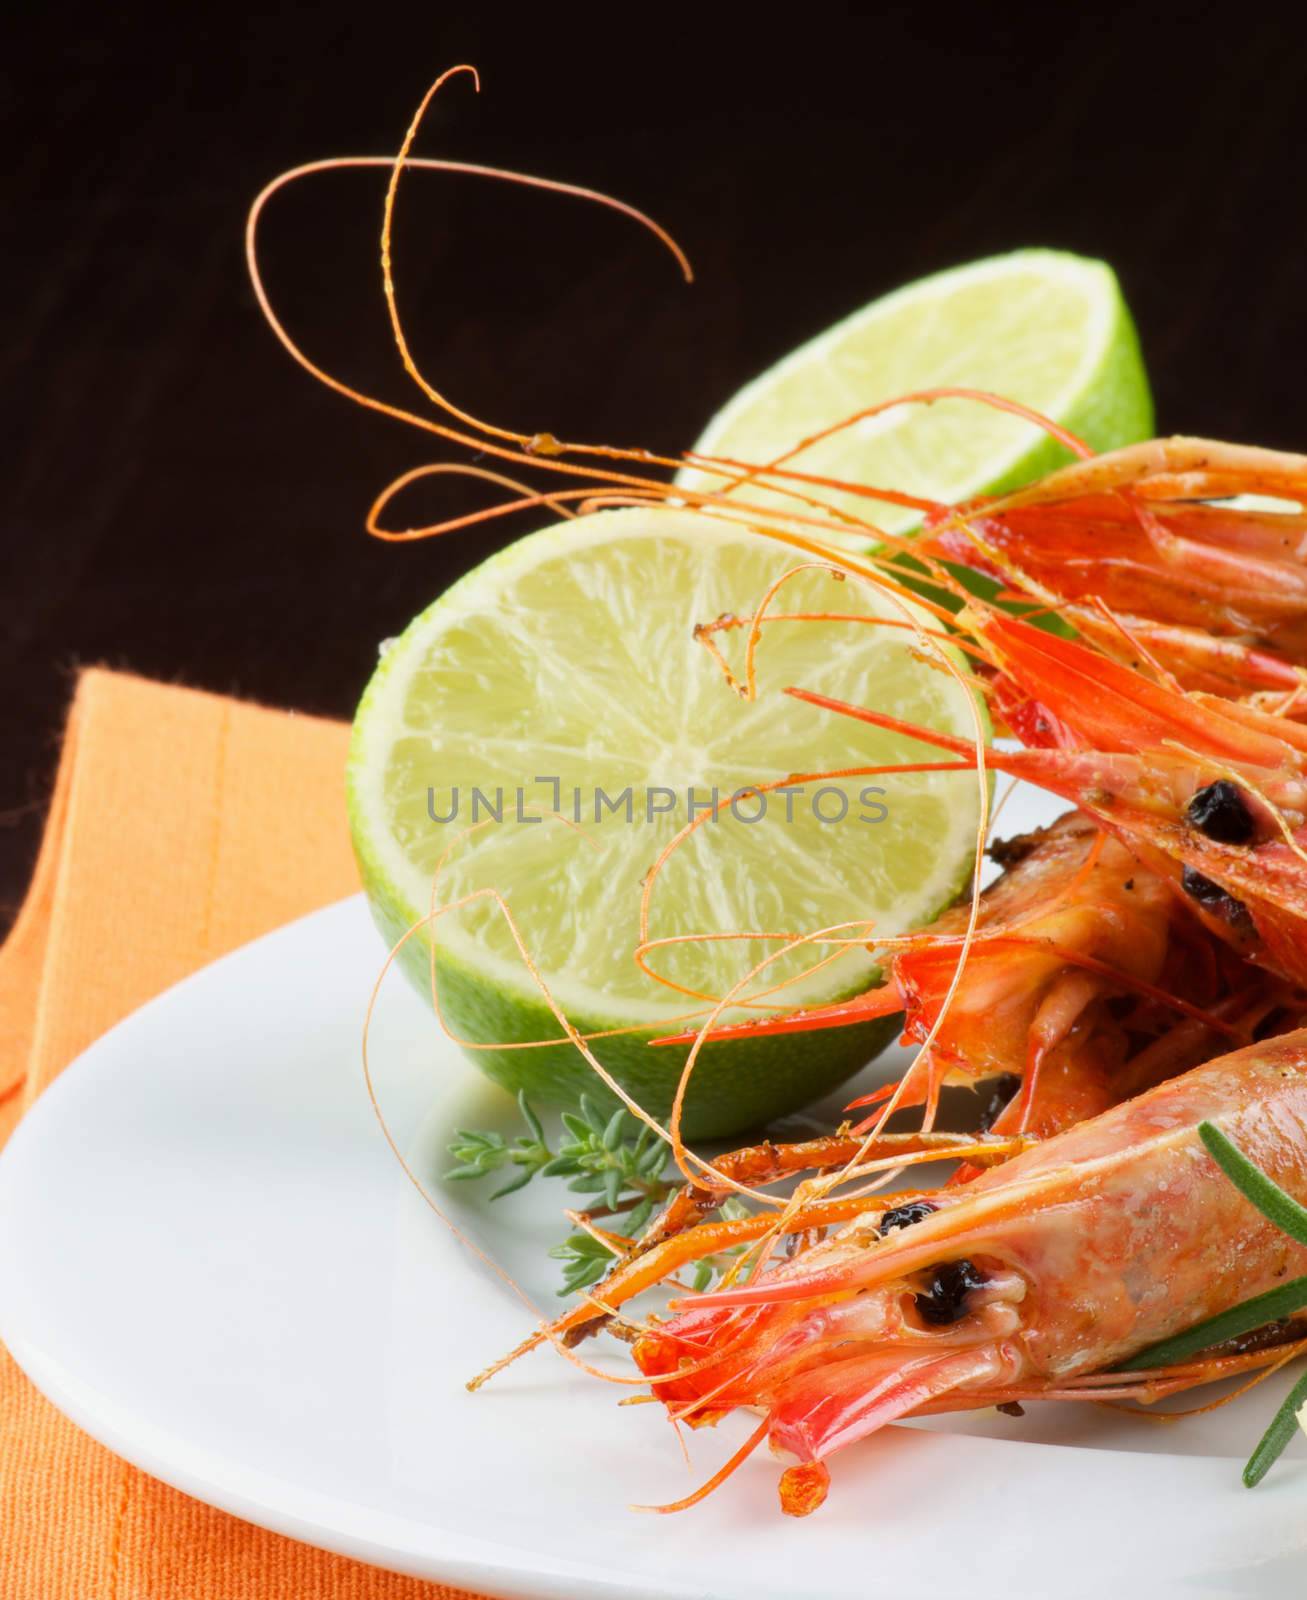 Delicious Roasted Shrimps with Lime on White Plate with Orange Napkin Cross Section on Dark Wooden background